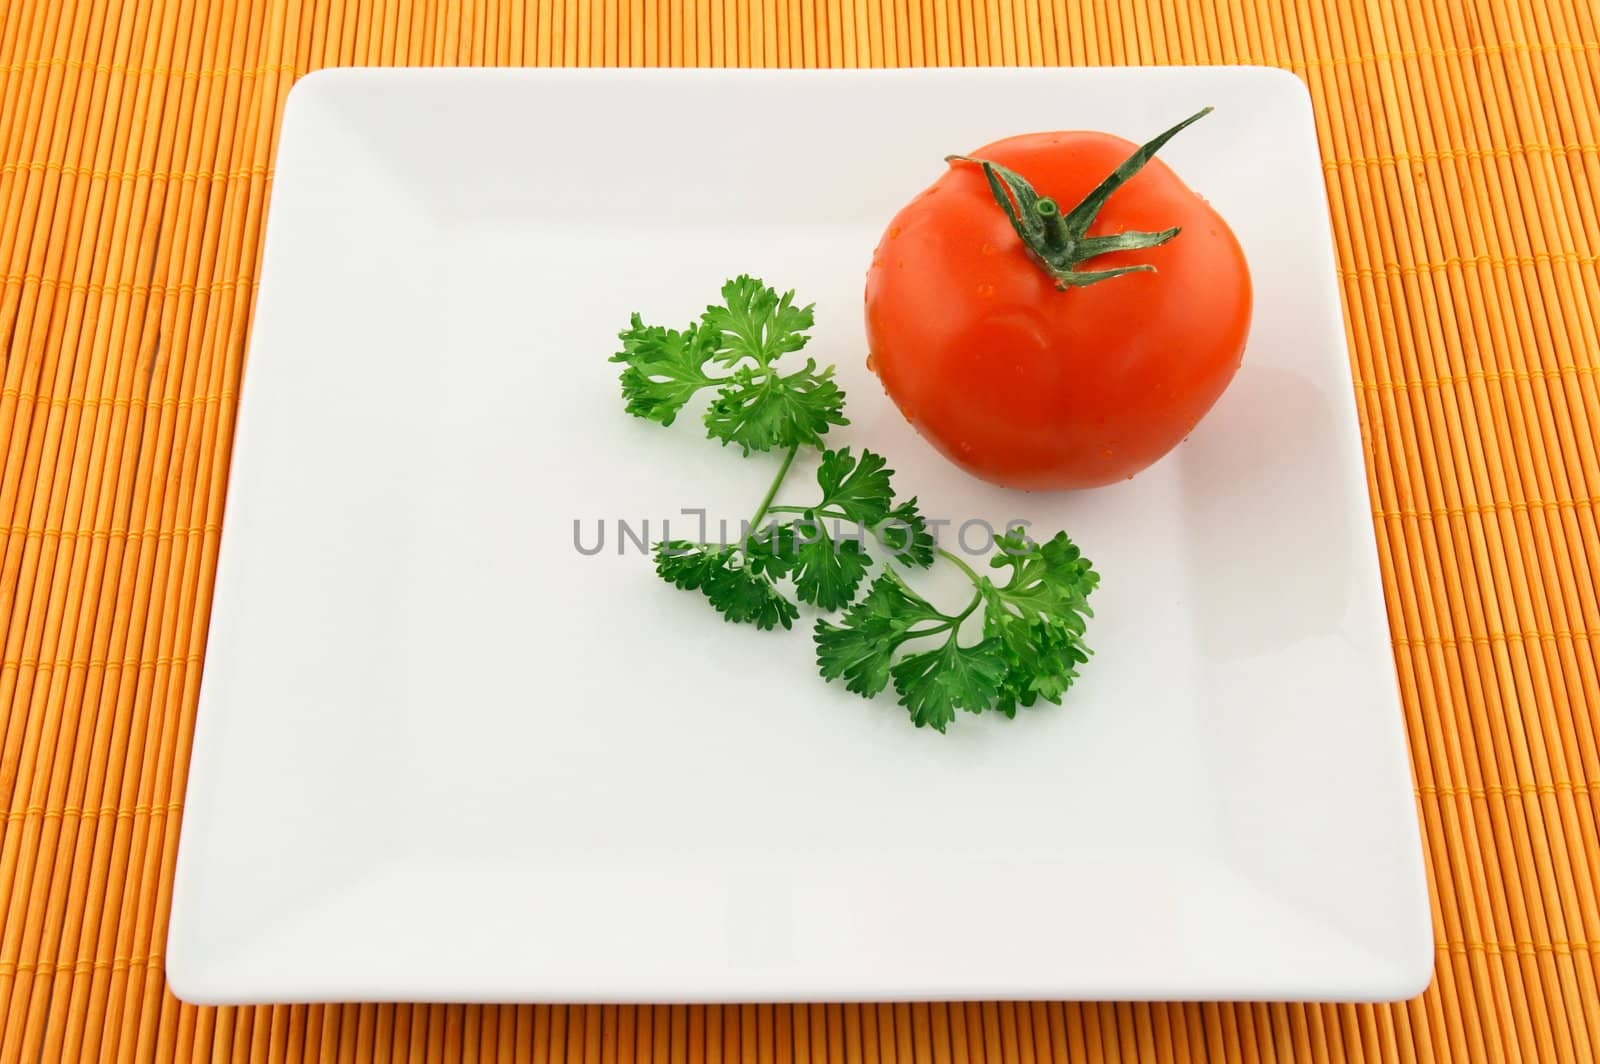 Tomato and parsley on a white square plate.